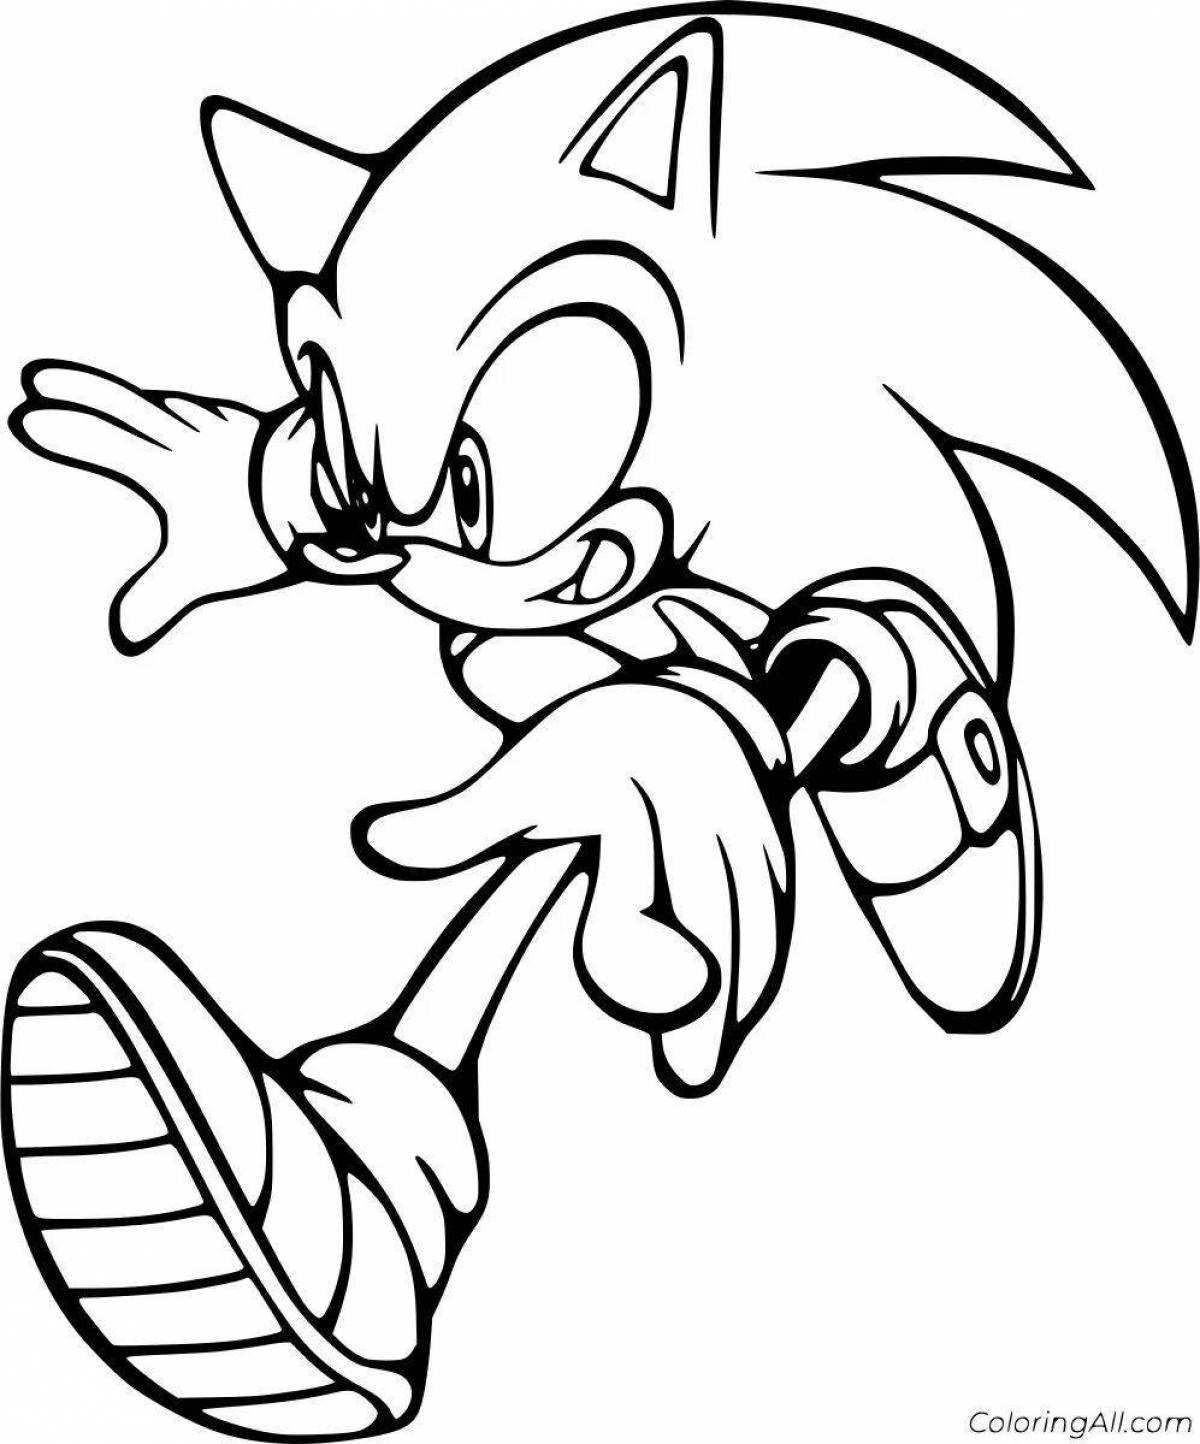 Charming sonic the hedgehog coloring book